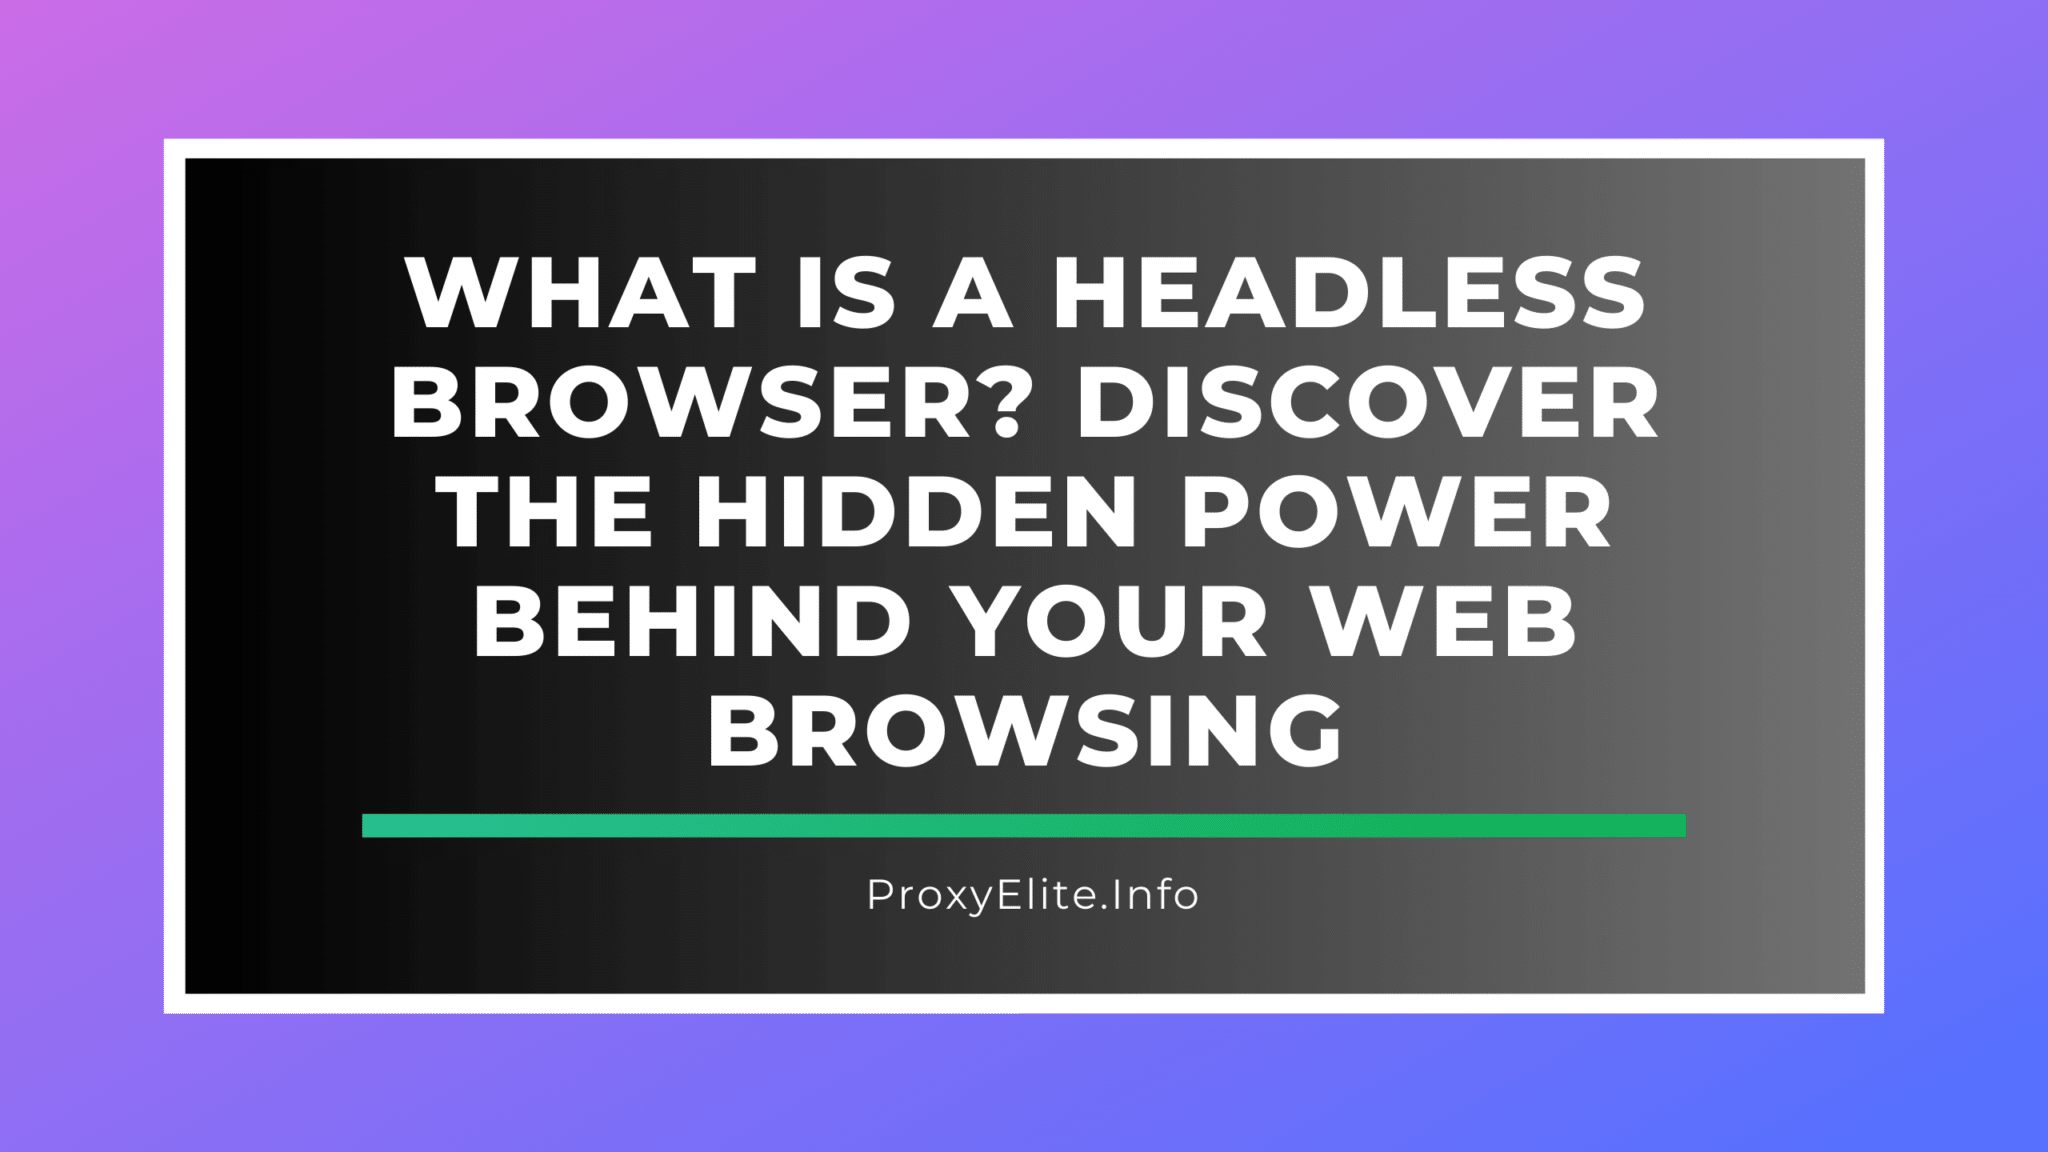 What is a Headless Browser? Discover the Hidden Power Behind Your Web Browsing